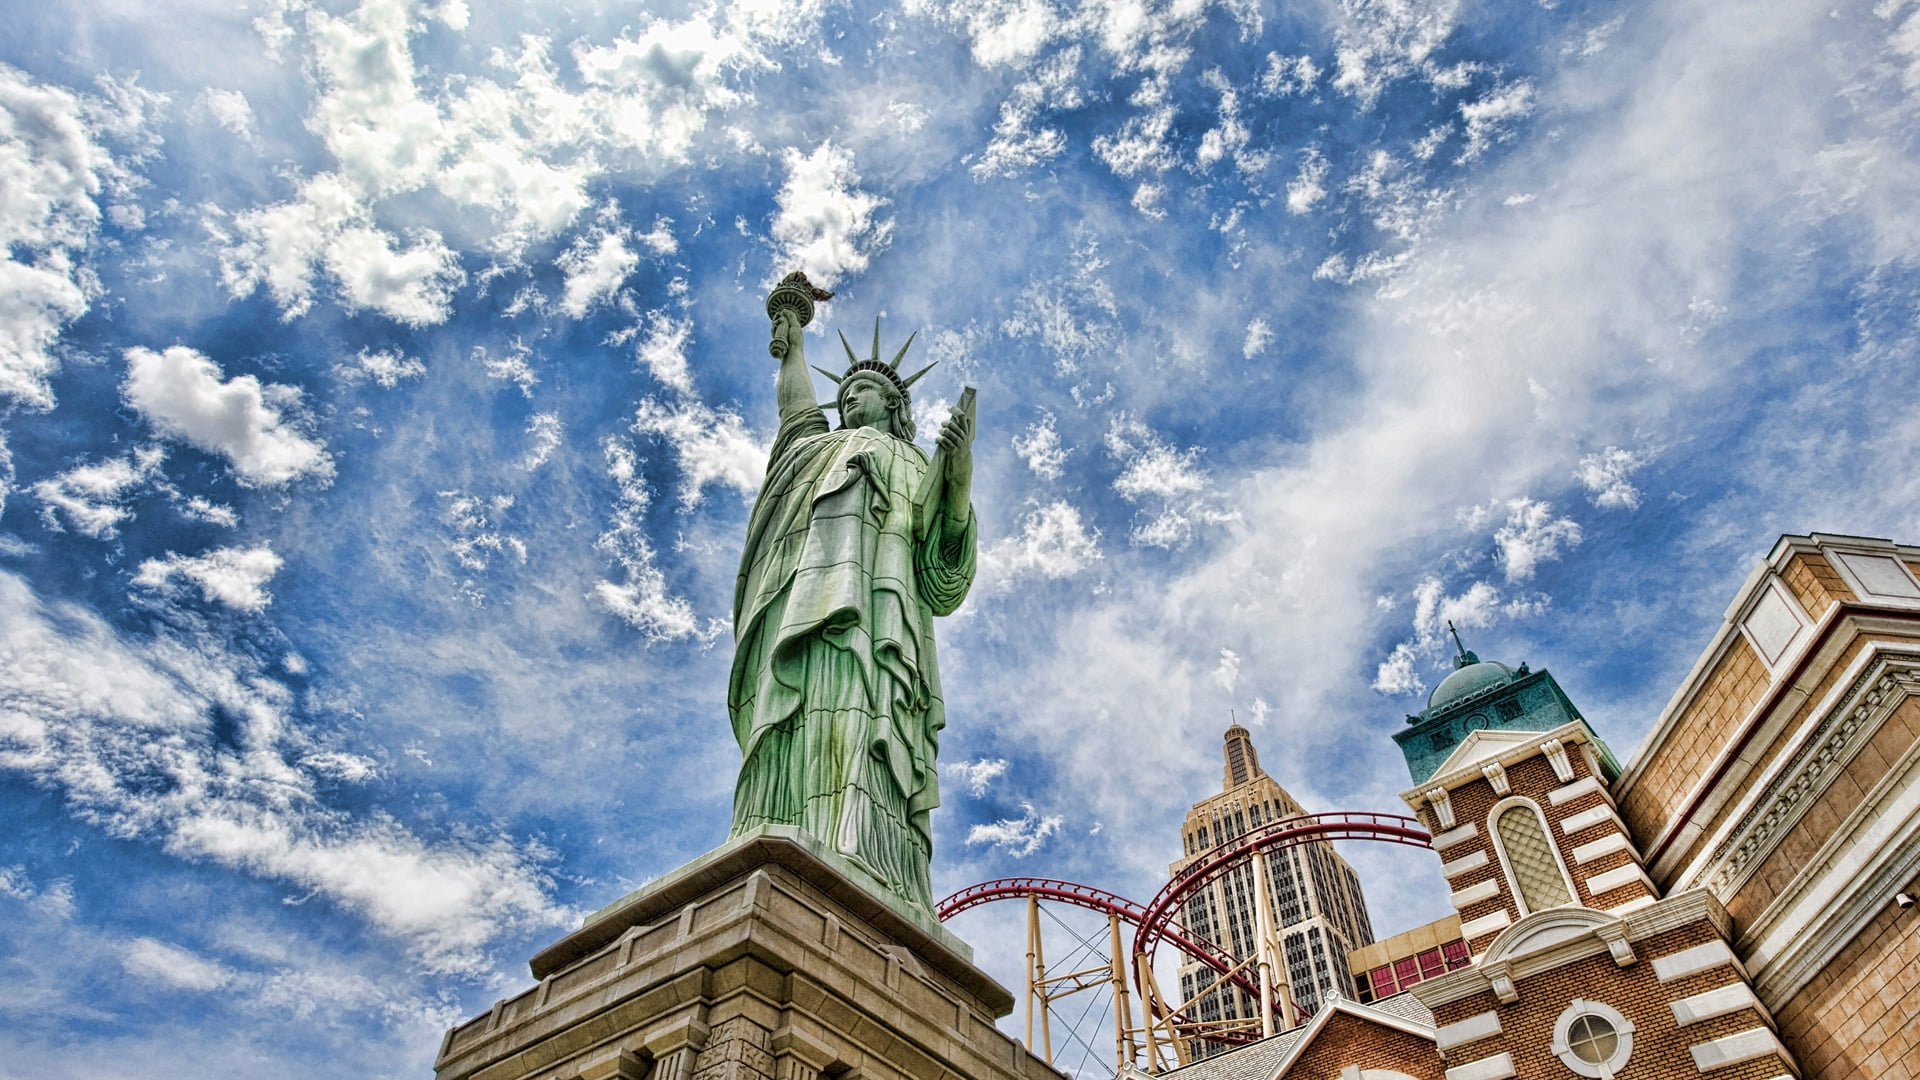 Statue of Liberty, New York, united states of america, hdr, architecture